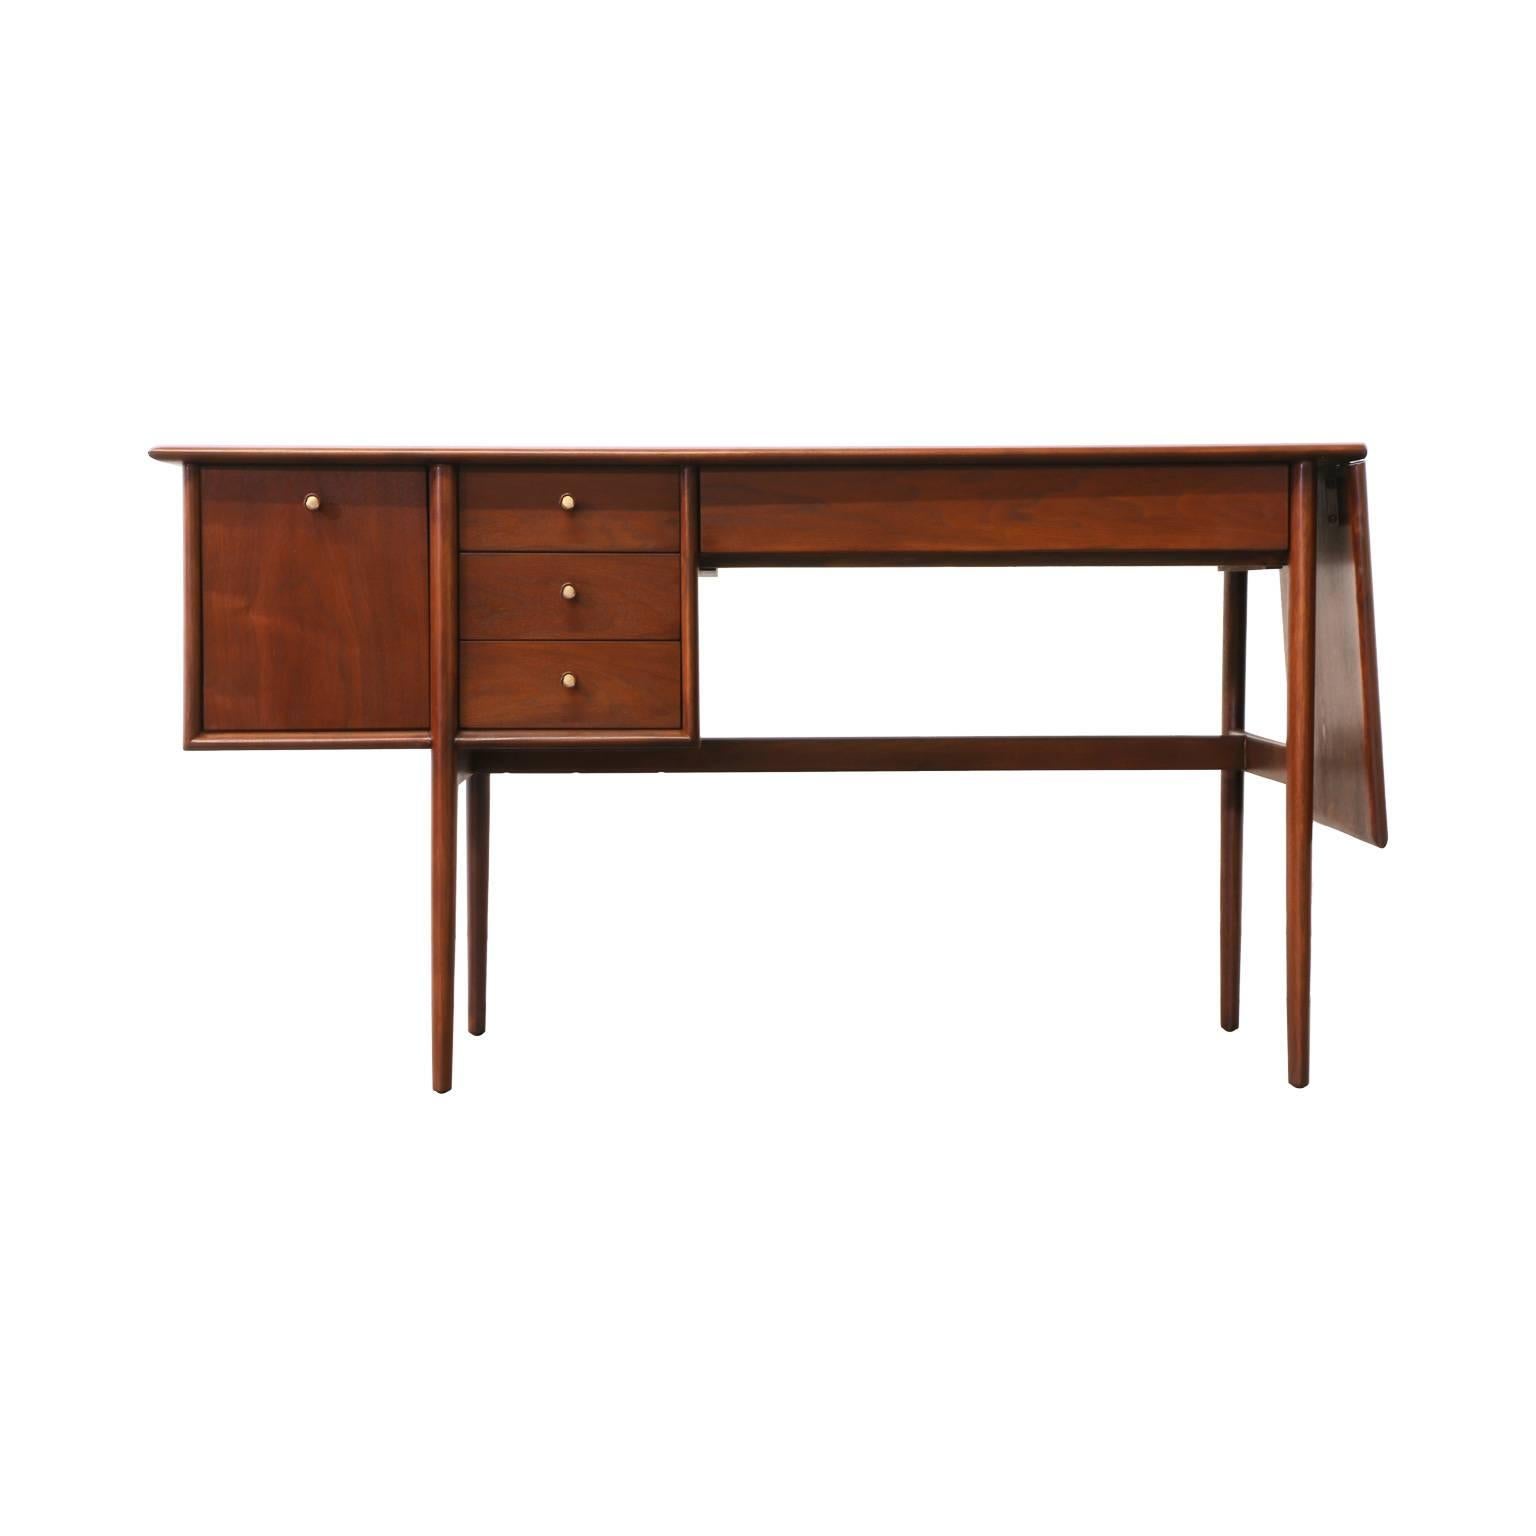 Designer: Barney Flagg
Manufacturer: Drexel “Parallel”
Period/Style: Mid Century Modern
Country: United States
Date: 1950’s

Dimensions: 29″ H x 71″L x 26.5″W
Materials: Walnut, Brass
Condition: Excellent – Newly Refinished
Number of Items: